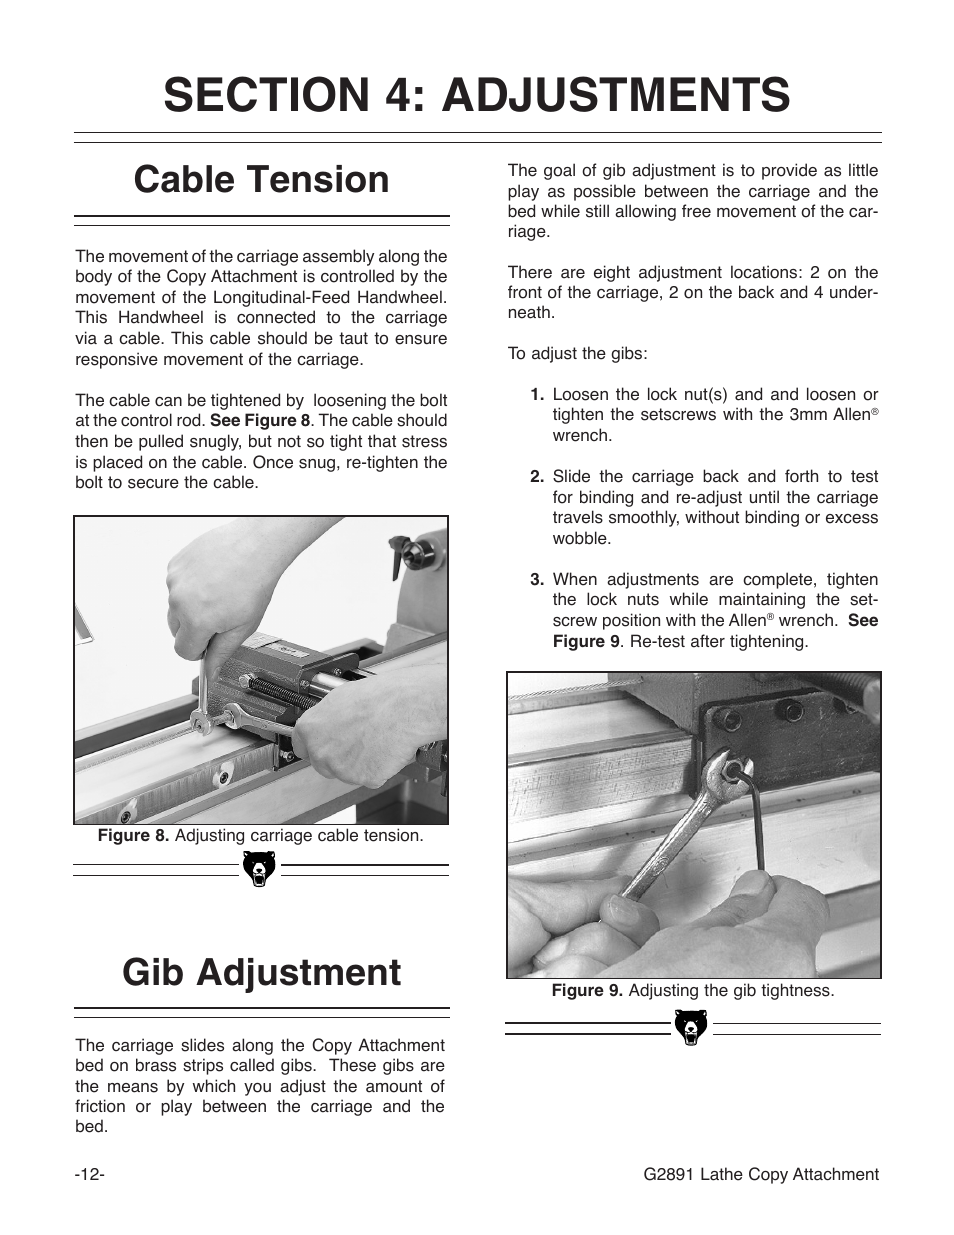 Cable tension, Gib adjustment | Grizzly 